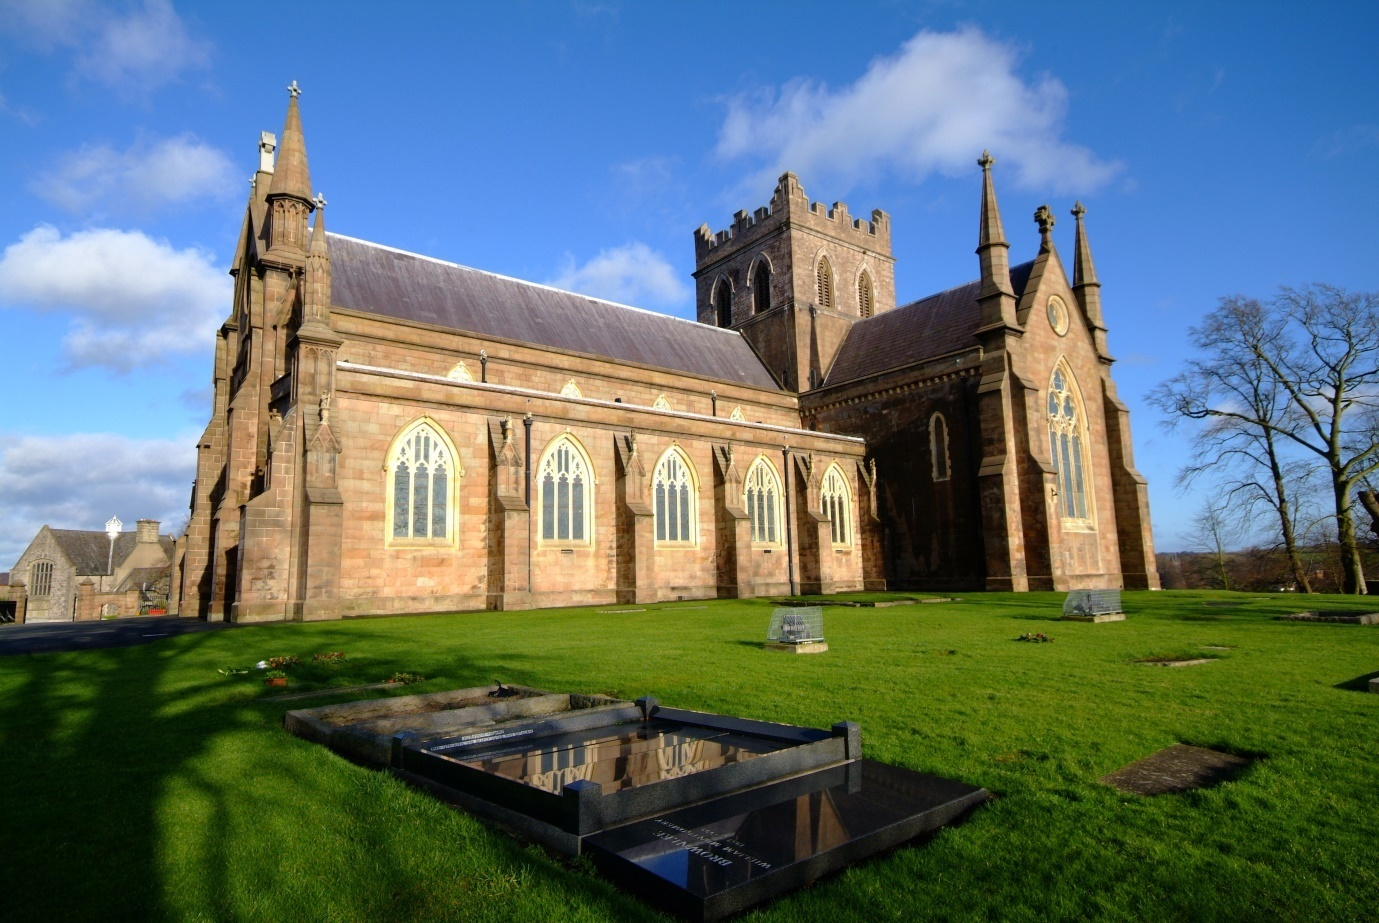 St. Patrick’s Cathedral, County Armagh